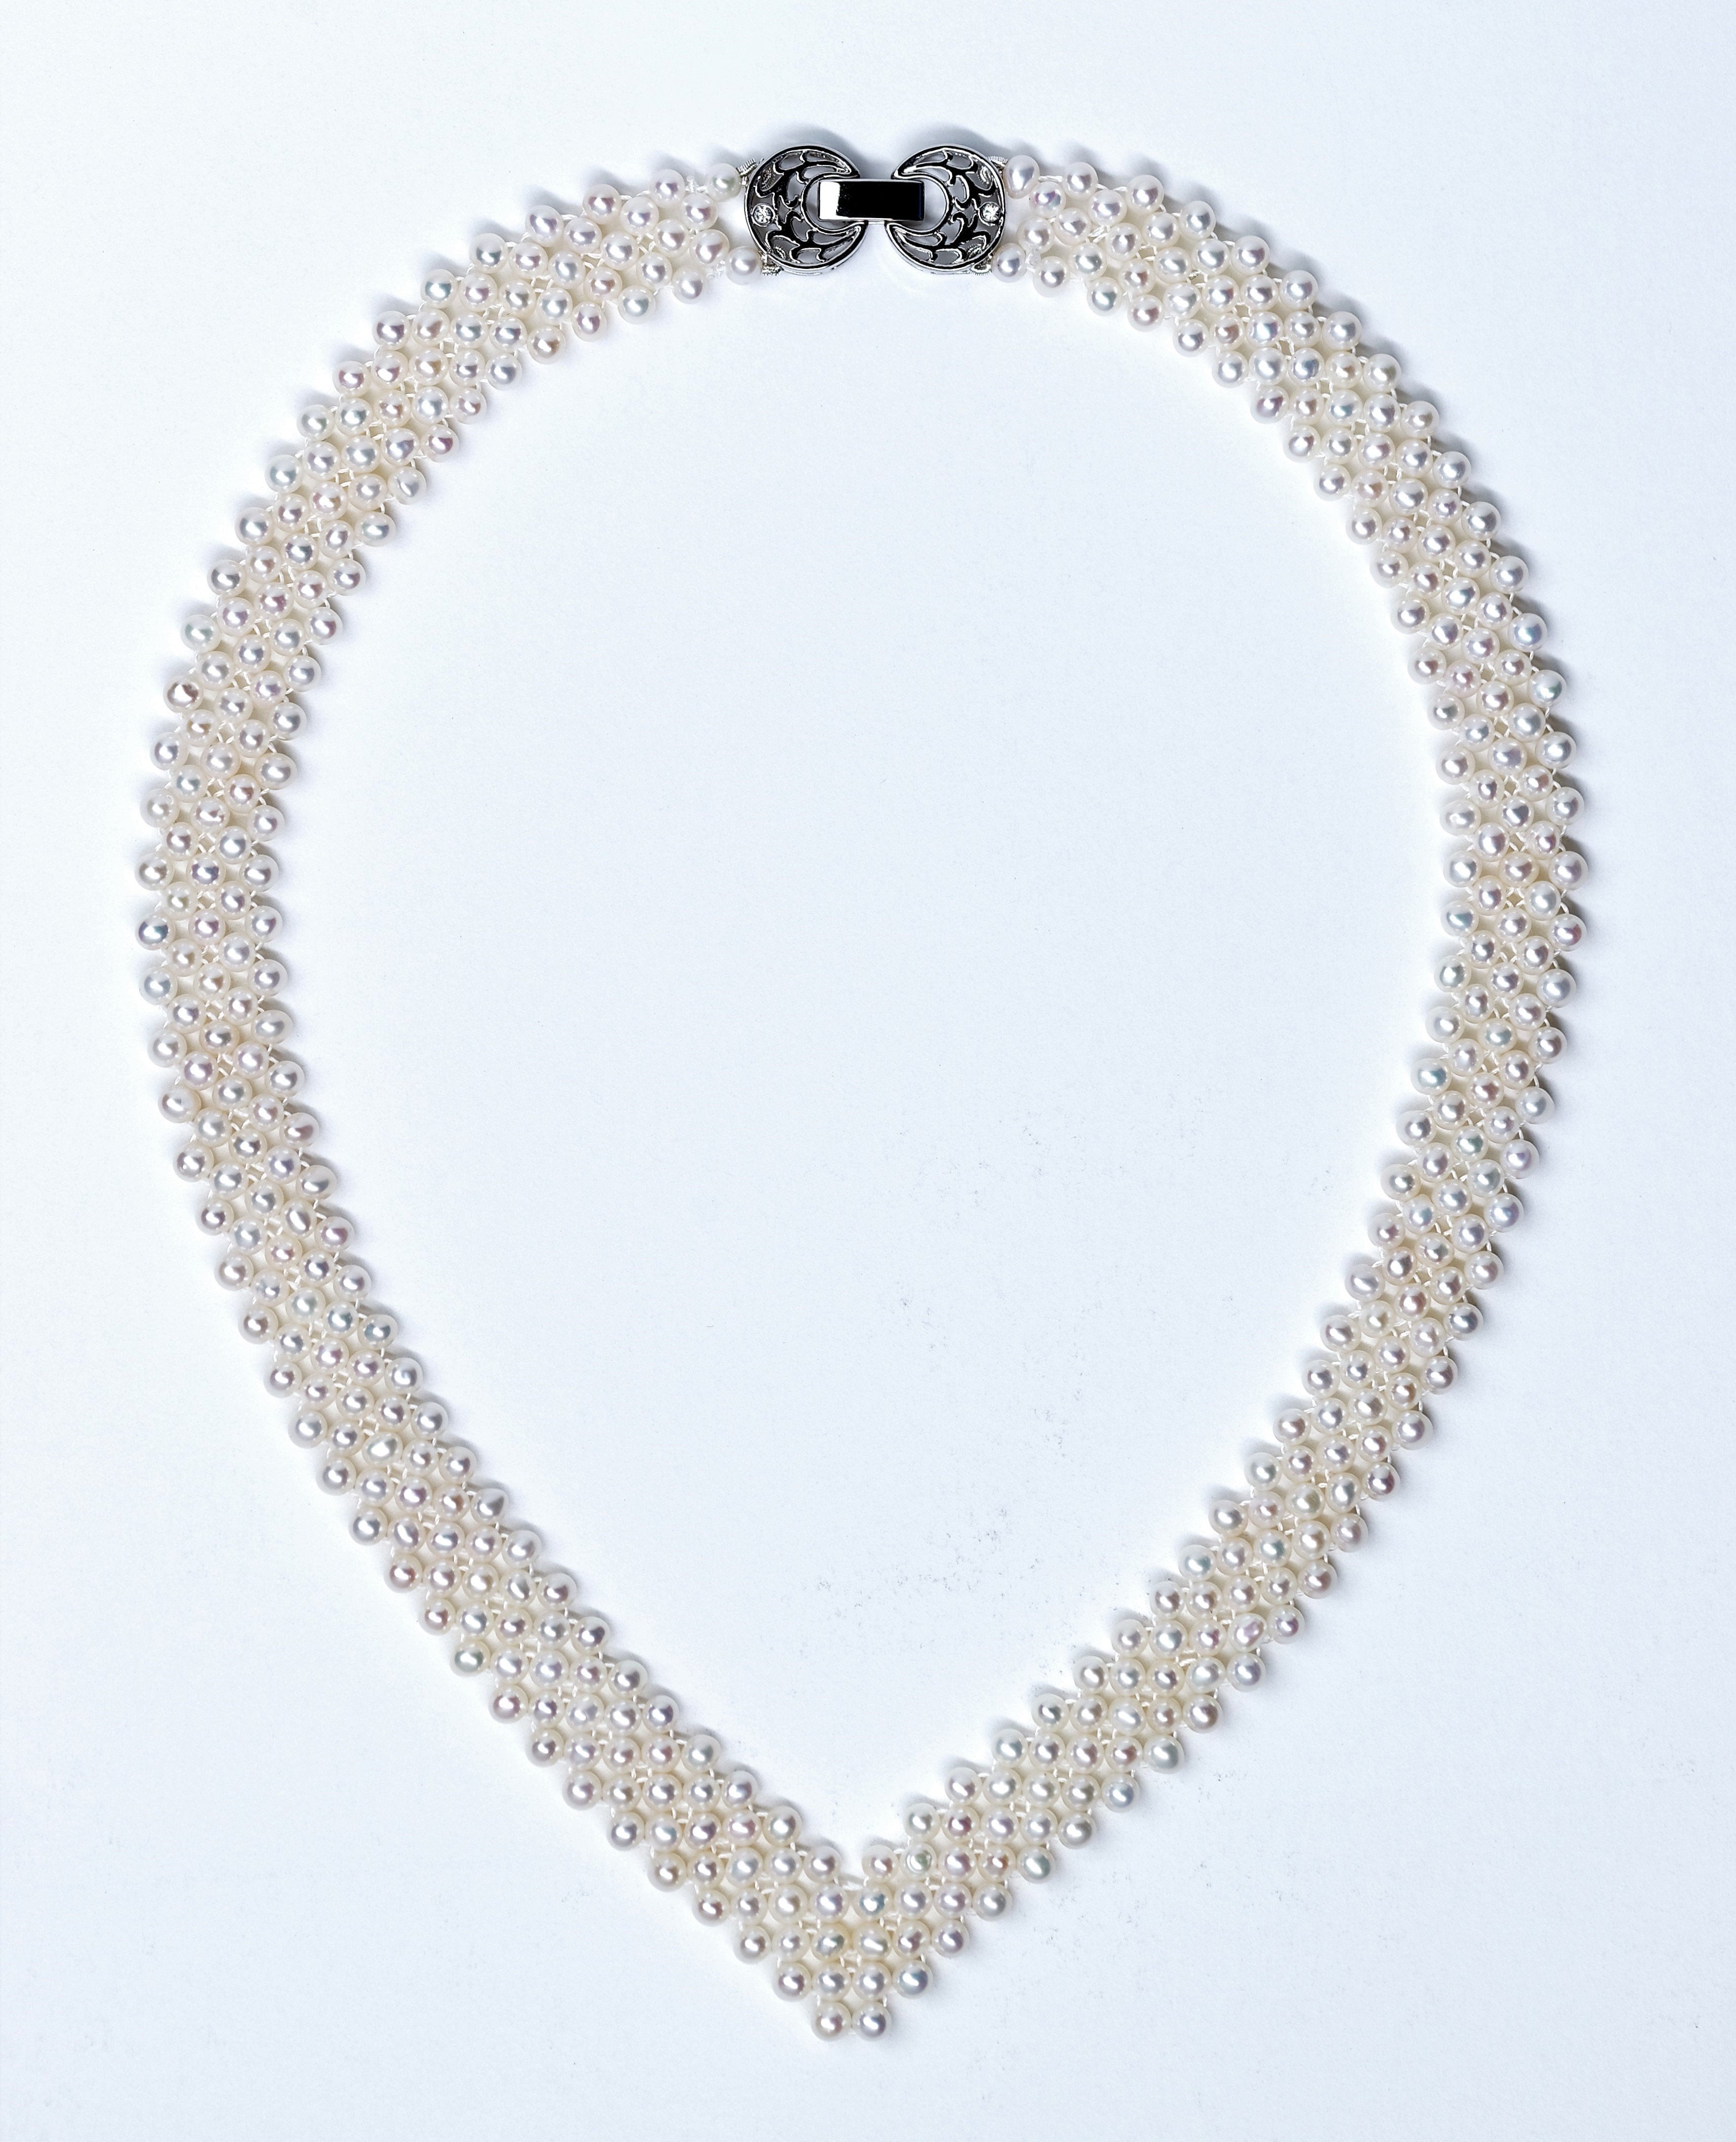 Neck Neck Baby Pearl Necklace